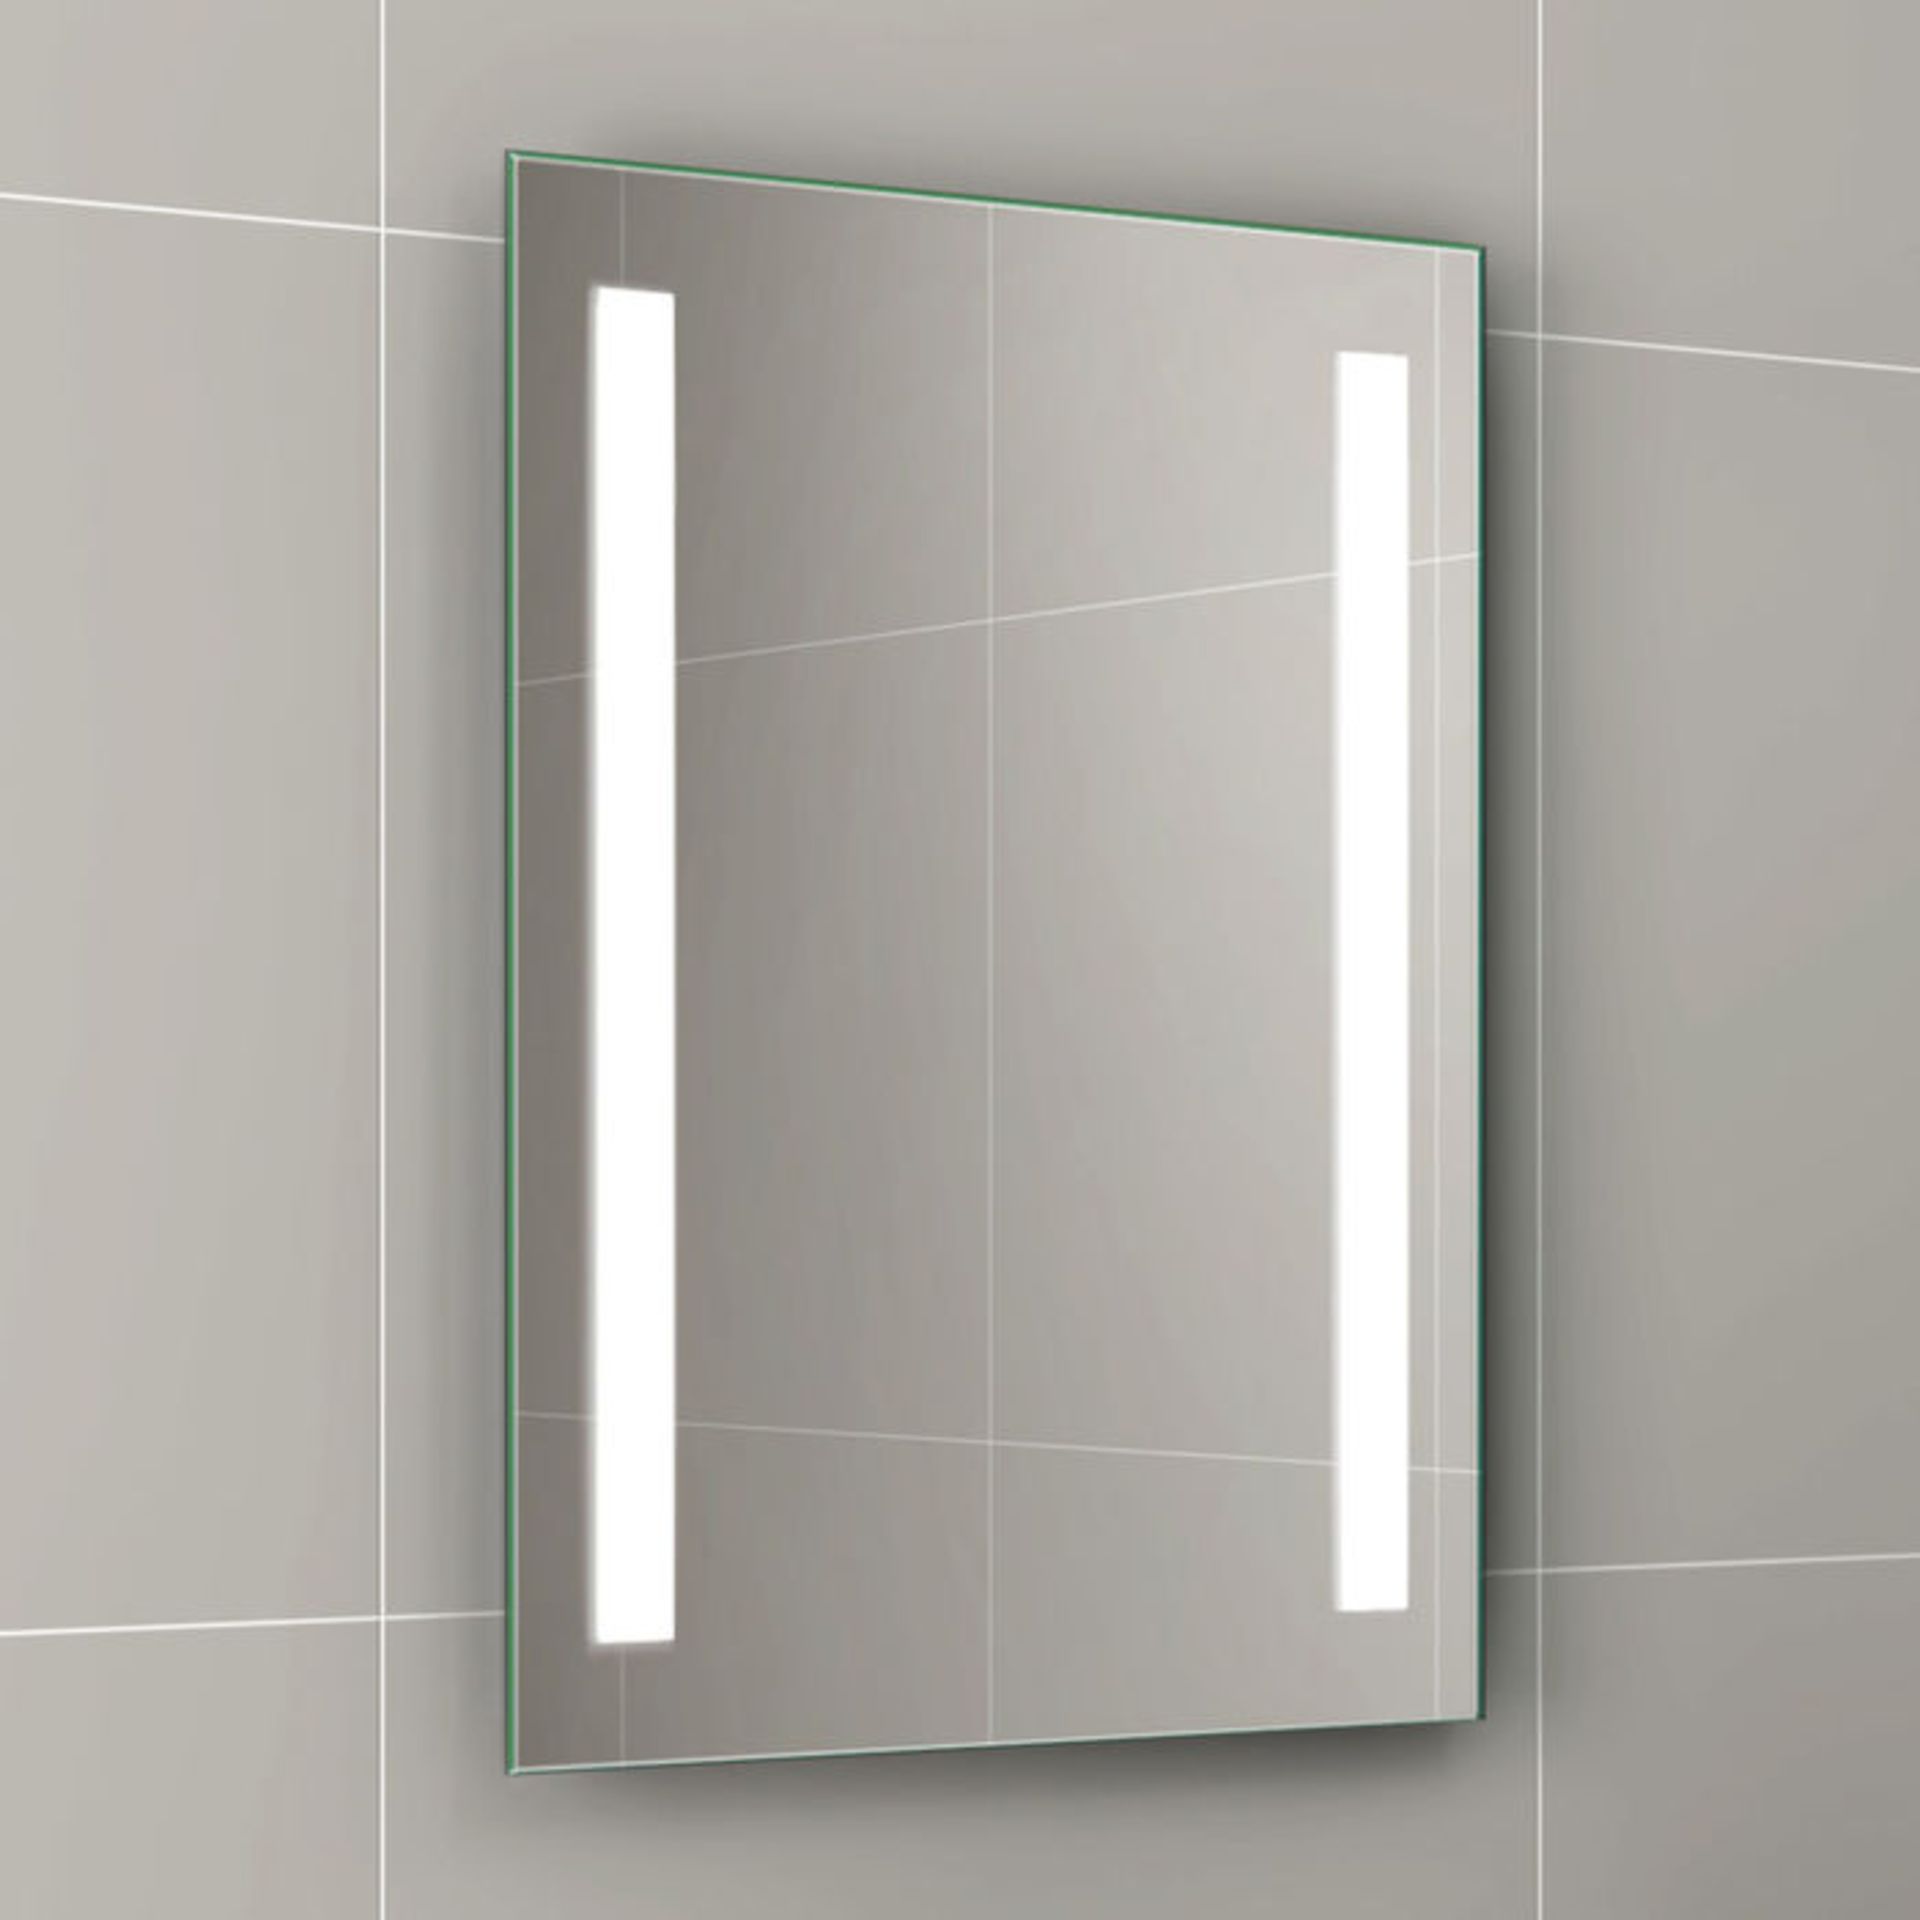 (TP195) 500x700mm Omega Illuminated LED Mirror - Battery Operated. Energy saving controlled On / Off - Image 2 of 3